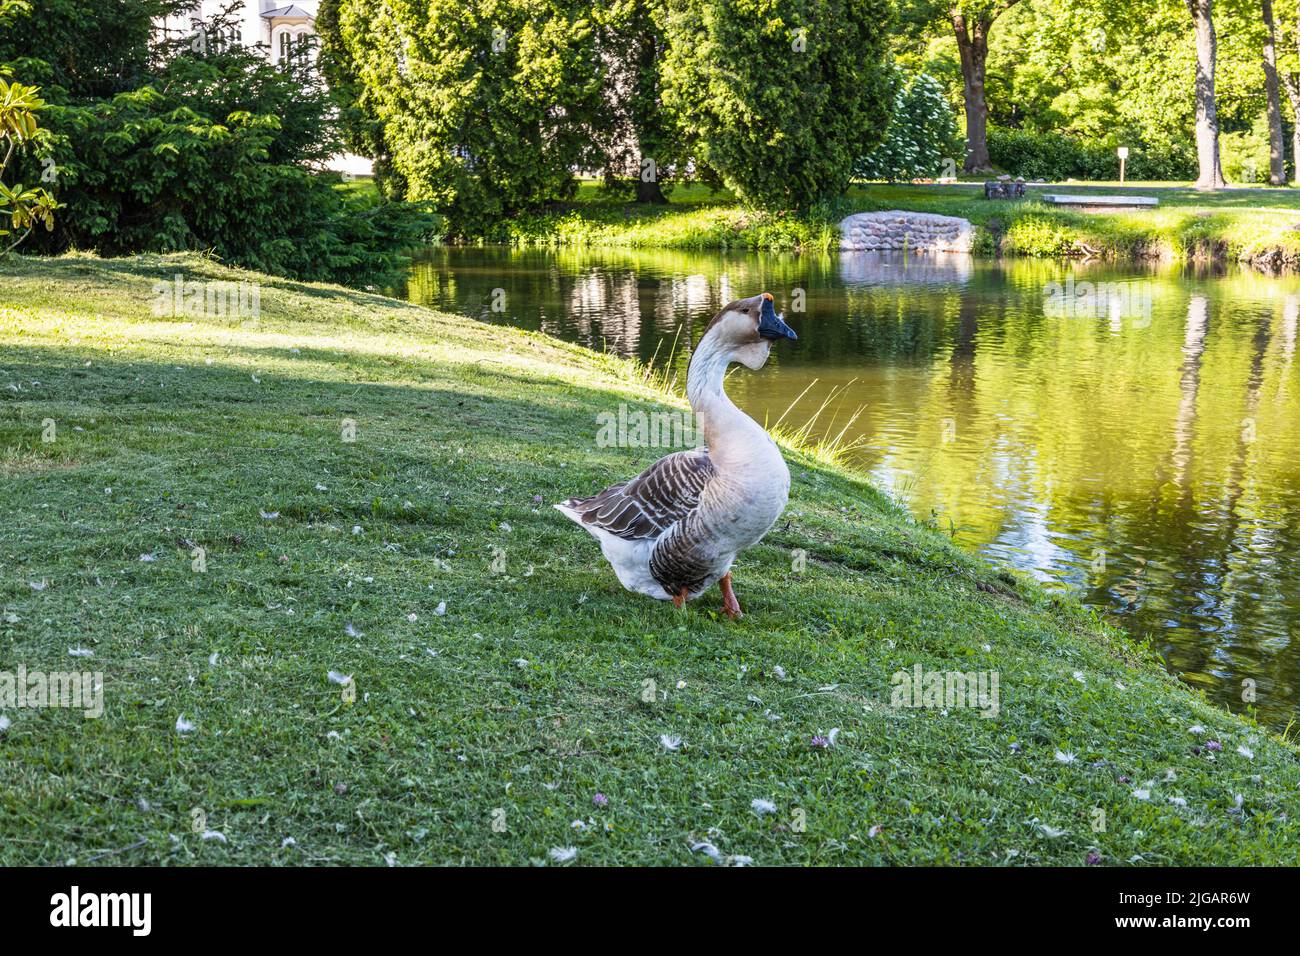 Wild ducks stand on the grass near the pond Stock Photo